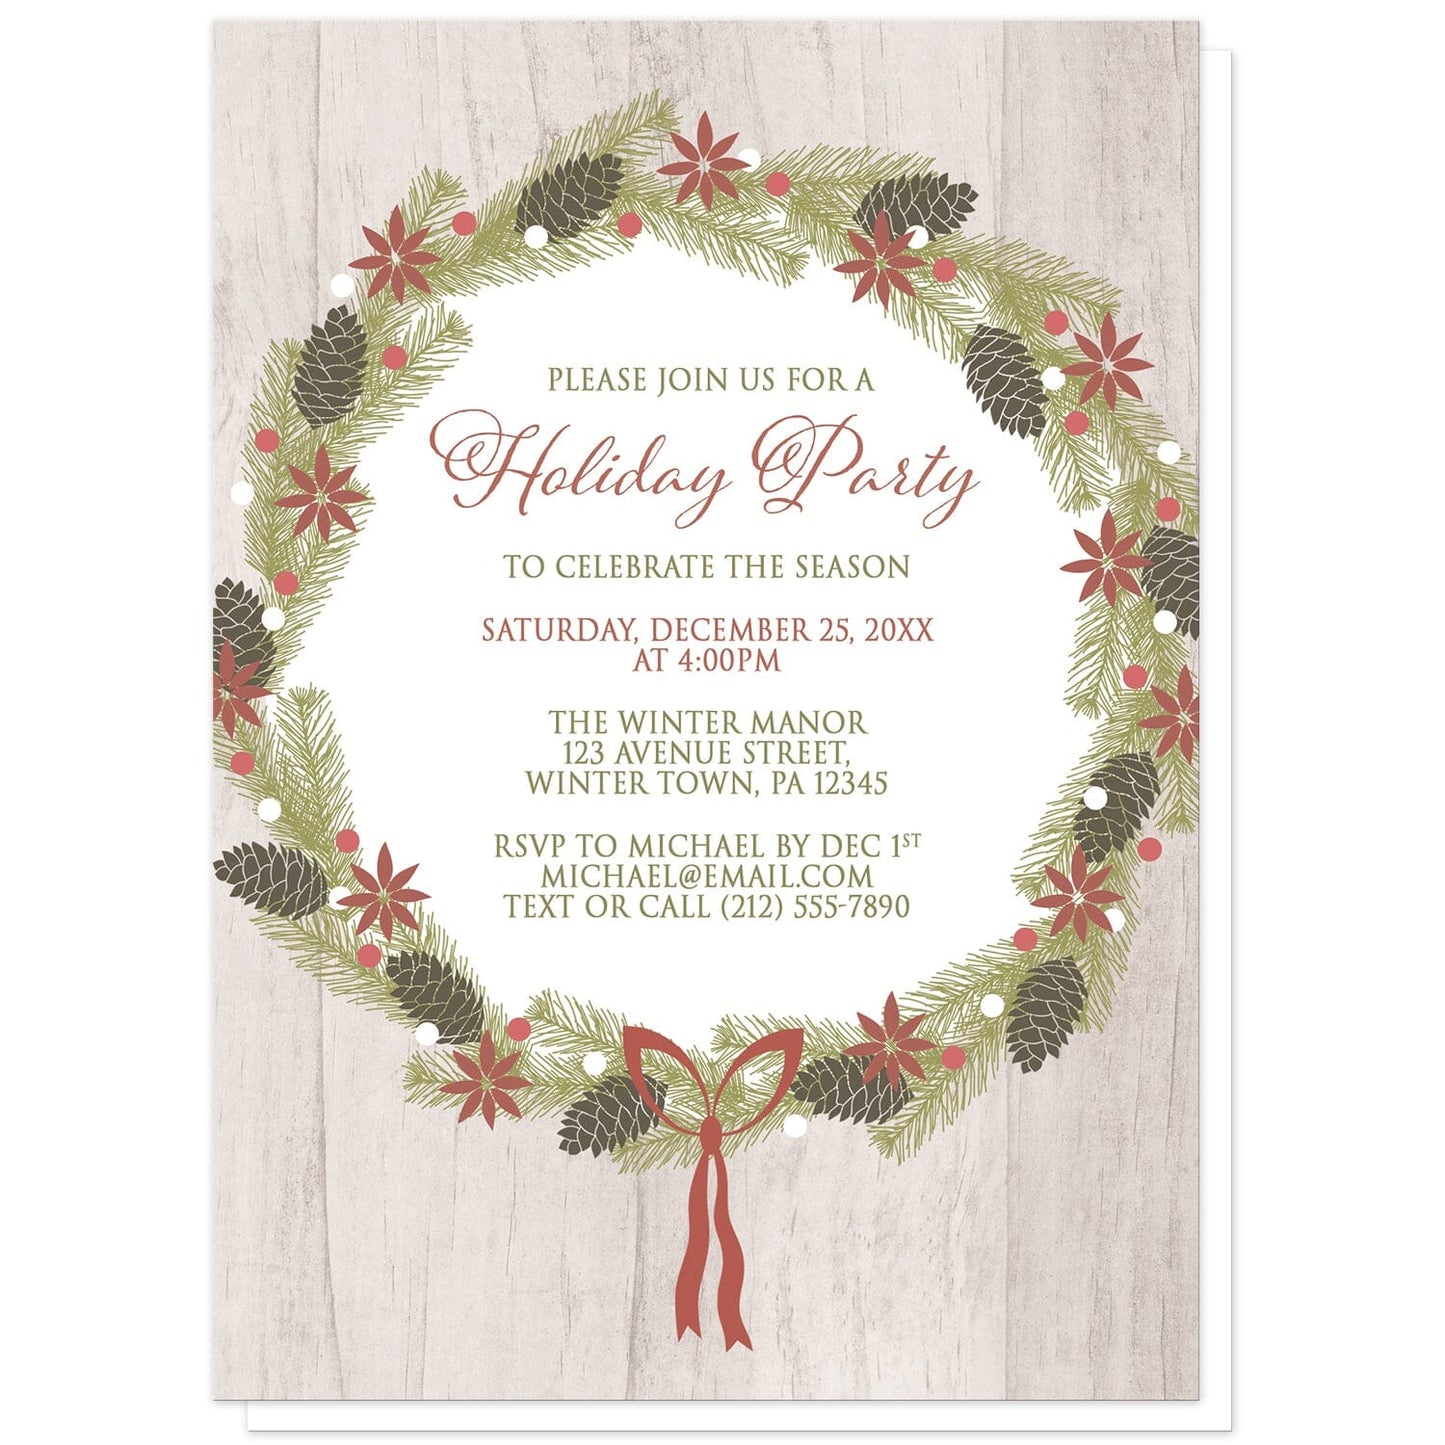 Rustic Poinsettia Pine Cone Wreath Holiday Invitations at Artistically Invited. Rustic poinsettia pine cone wreath holiday invitations designed with a poinsettia, pine cone, and pine boughs wreath over a light wood background illustration. Your personalized holiday party details are custom printed in faded red and green over white in the center of this holiday wreath.